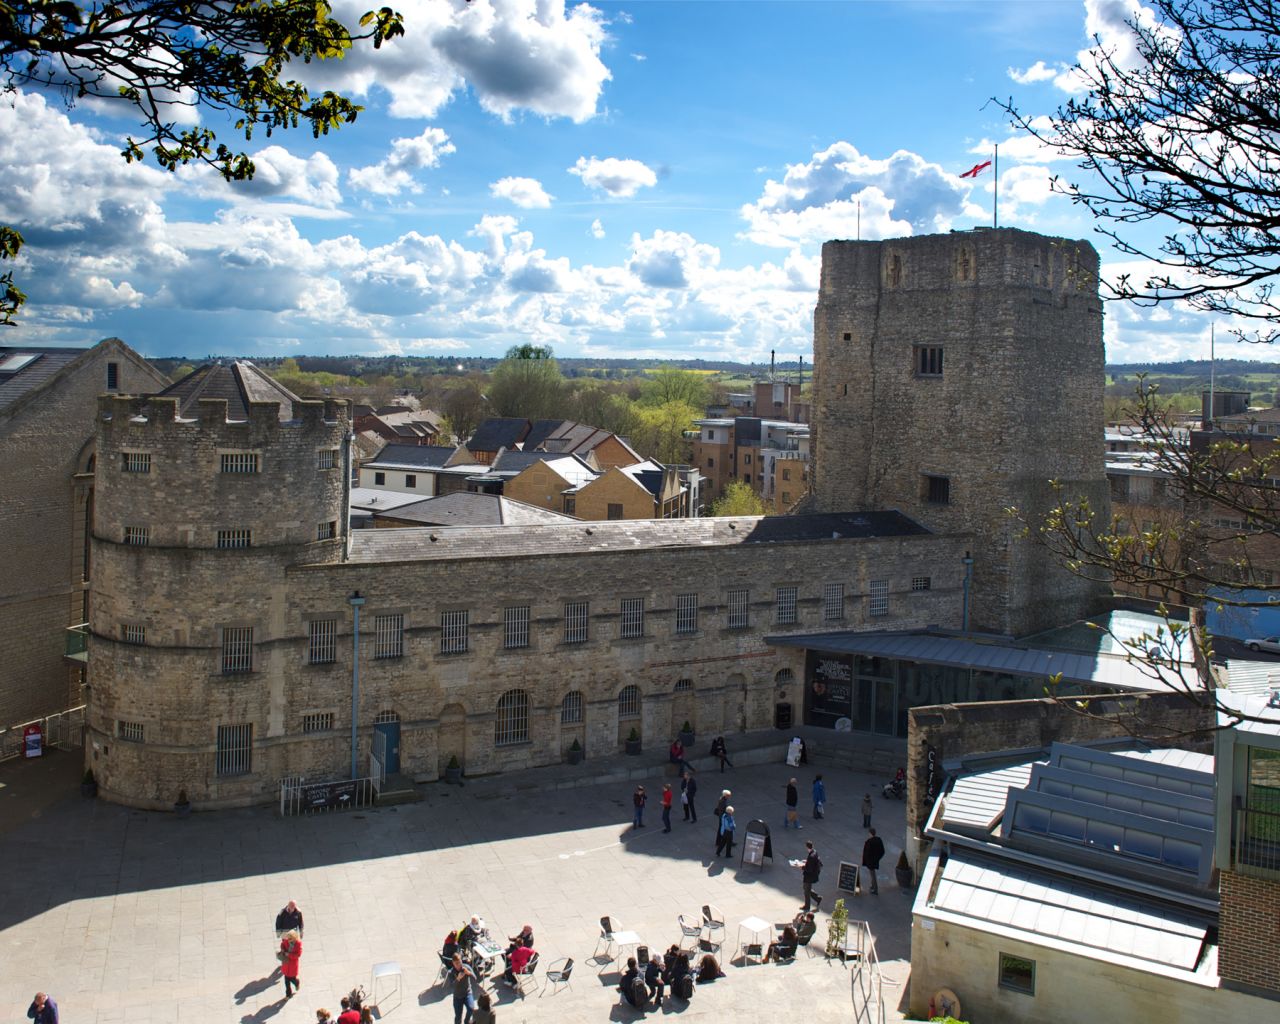 Oxford Castle and the Saxon St. George's Tower.